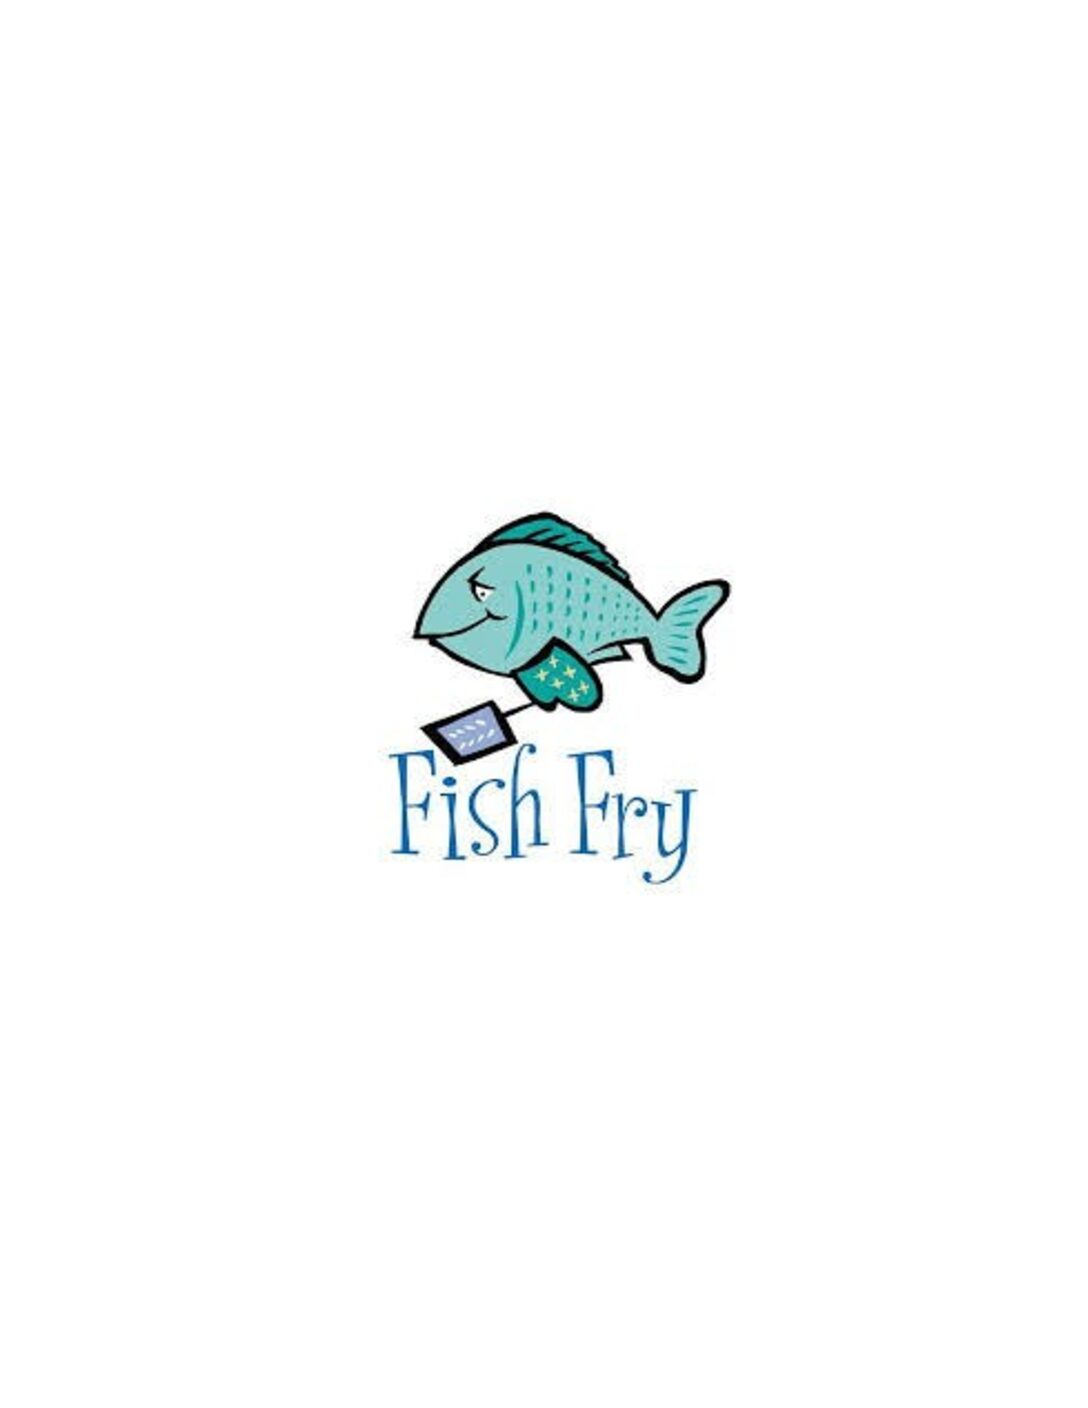 Lenten Fish Fry – Every Friday (except Good Friday) from 5-7 p.m.